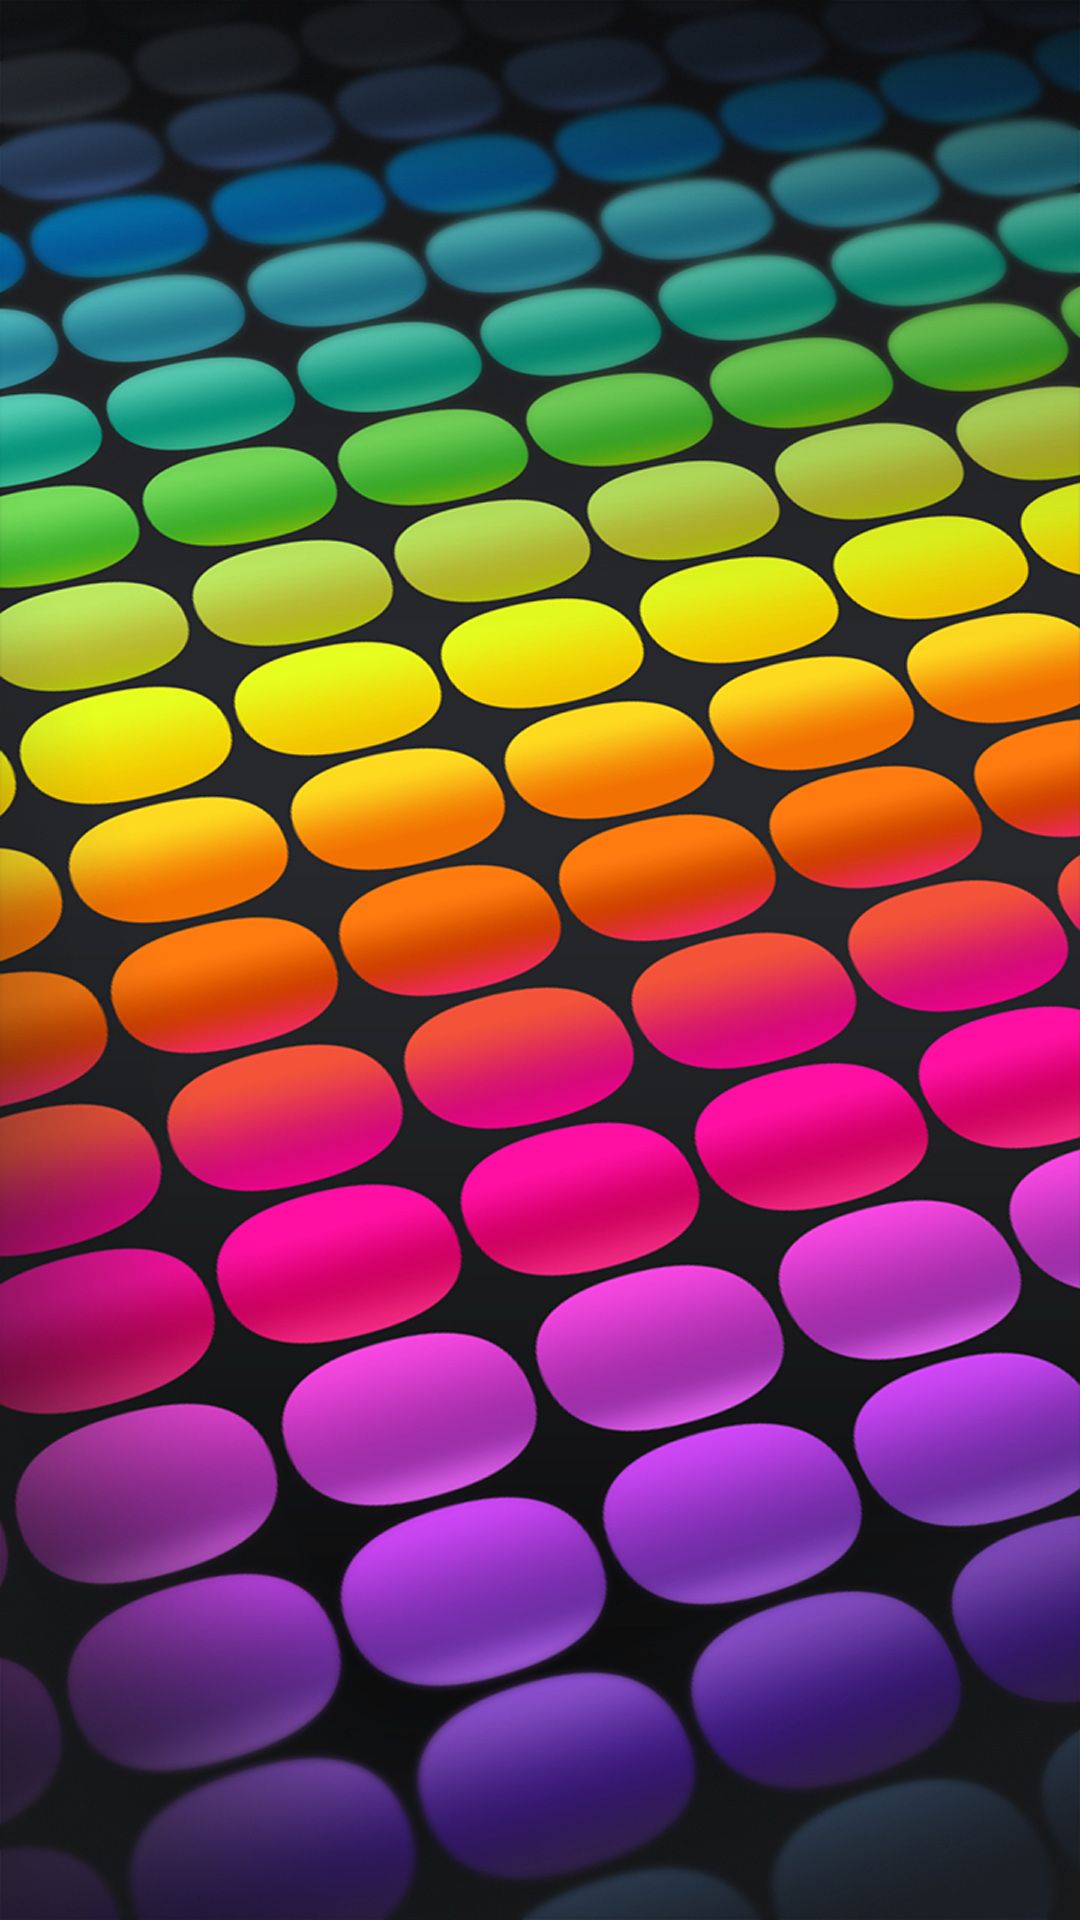 Colored Dots iPhone 6 Plus Wallpaper